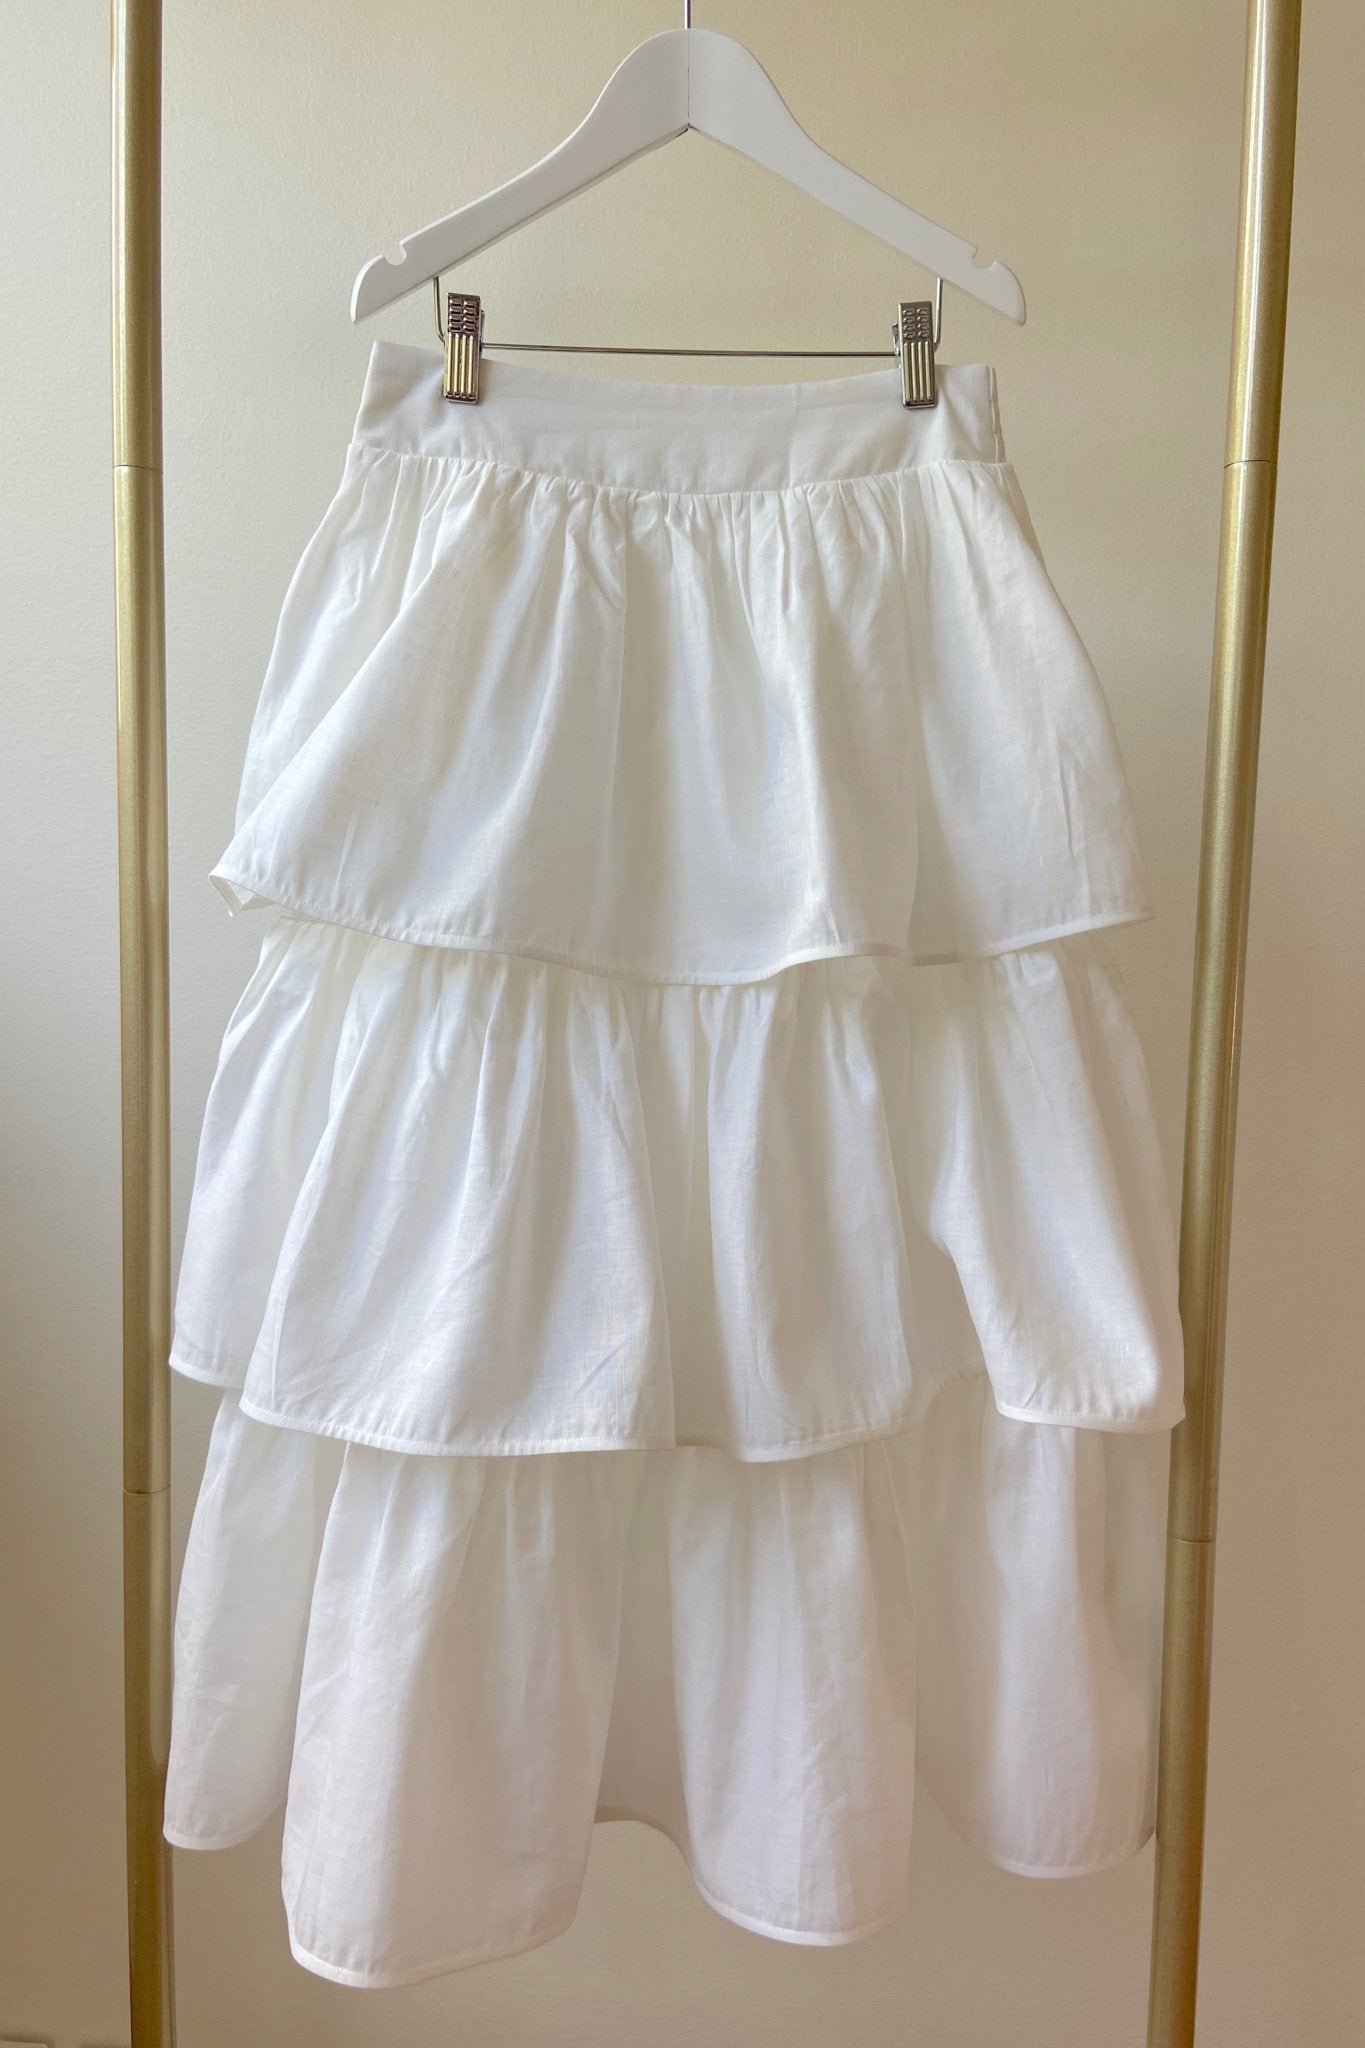 Sing a Song of Rainbows Skirt - Antique White - Women's - Chloé and Amélie